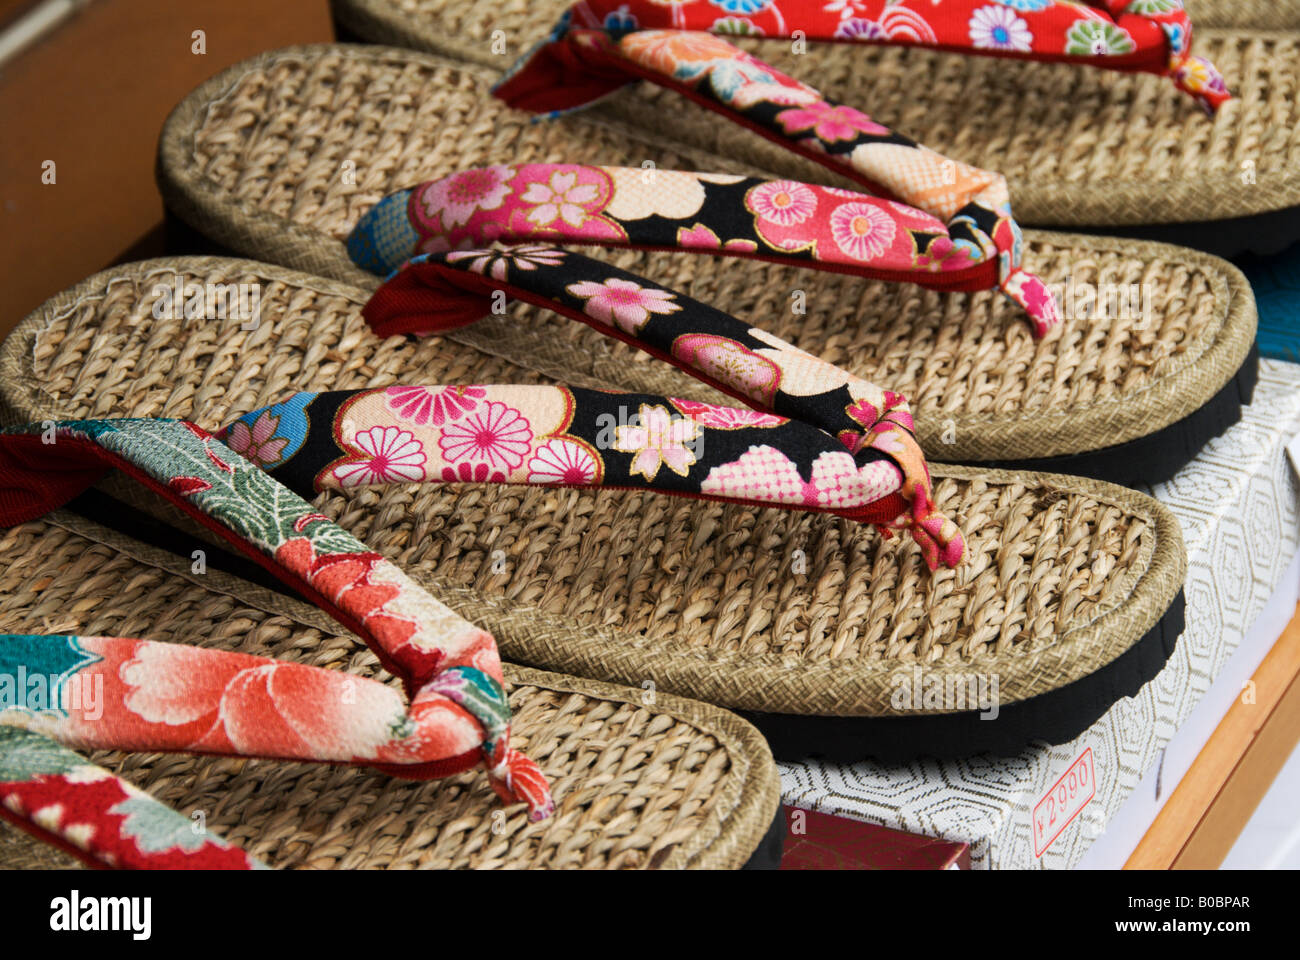 The road leading up to Asakusa s Sensoji Temple in Tokyo is lined with souvenir shops These sandals are designed as souvenirs. Stock Photo